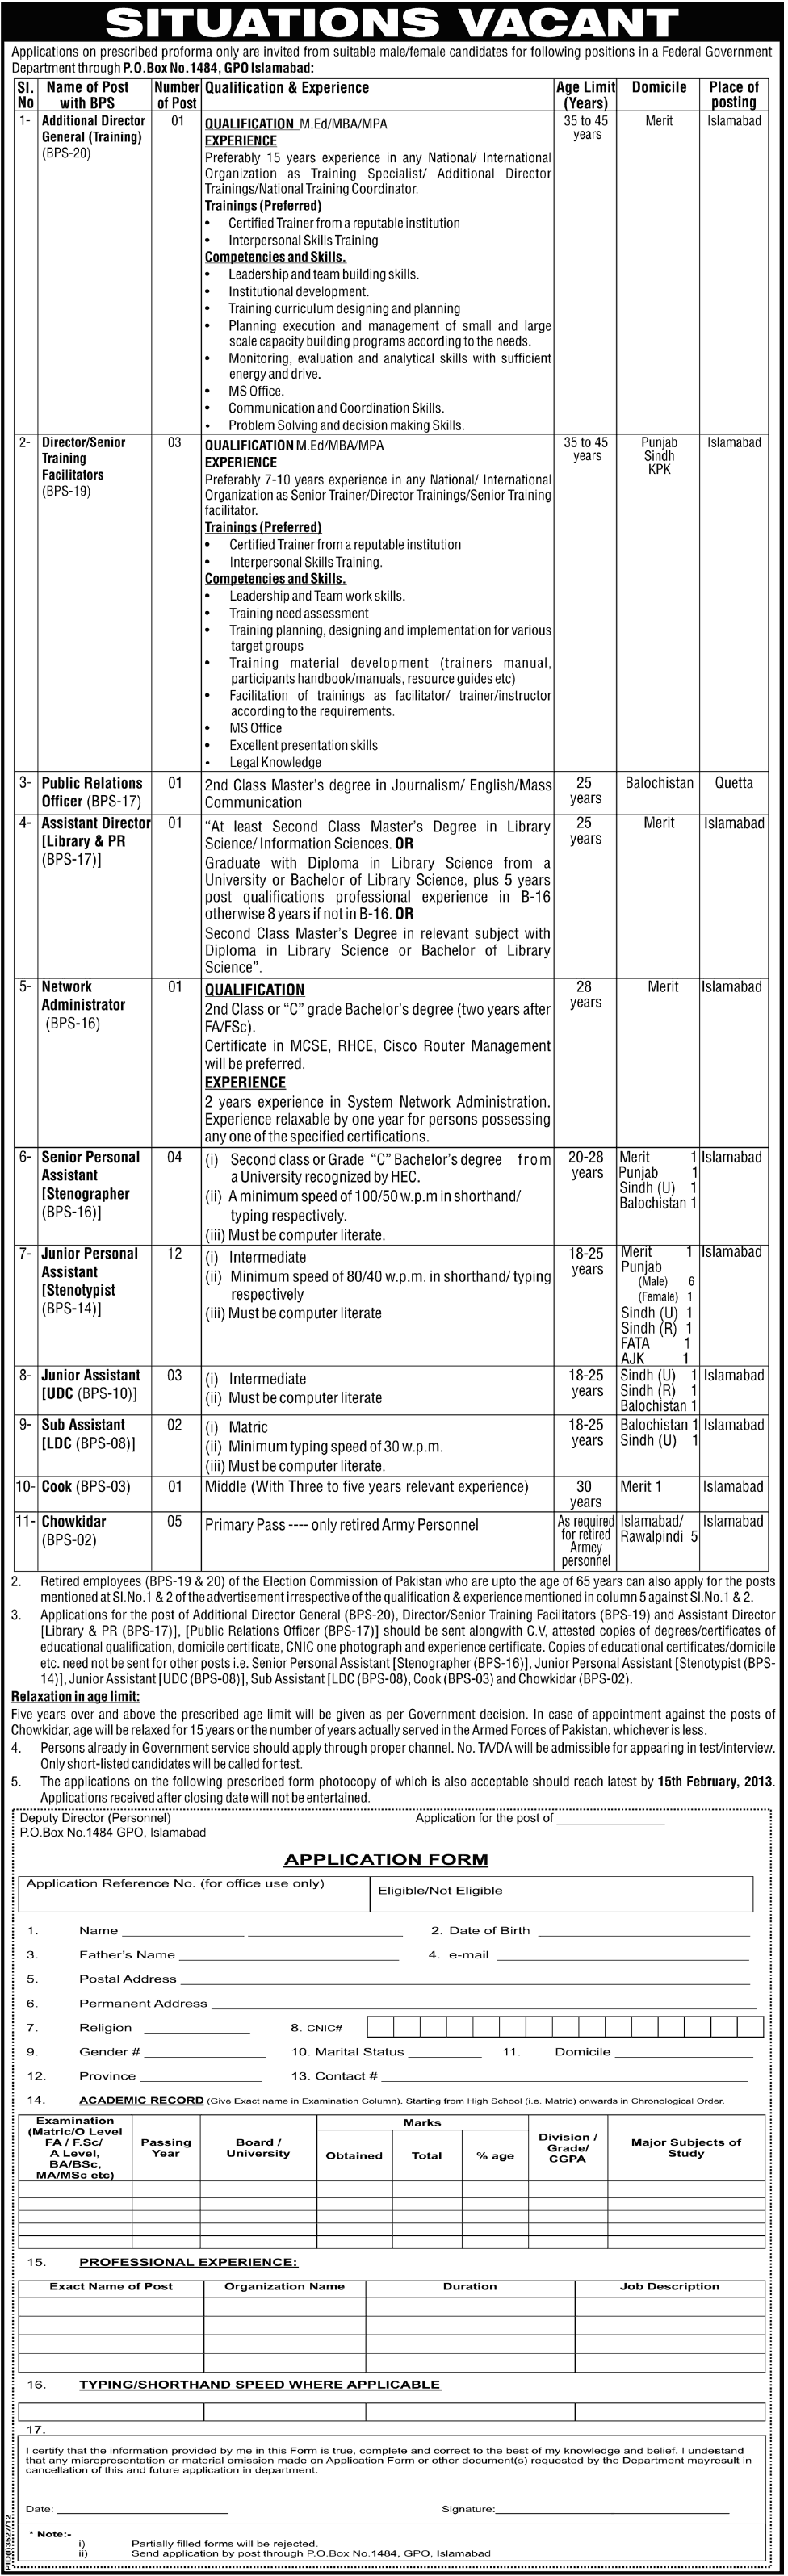 PO Box 1484 Islamabad Jobs 2013 in a Federal Government Department